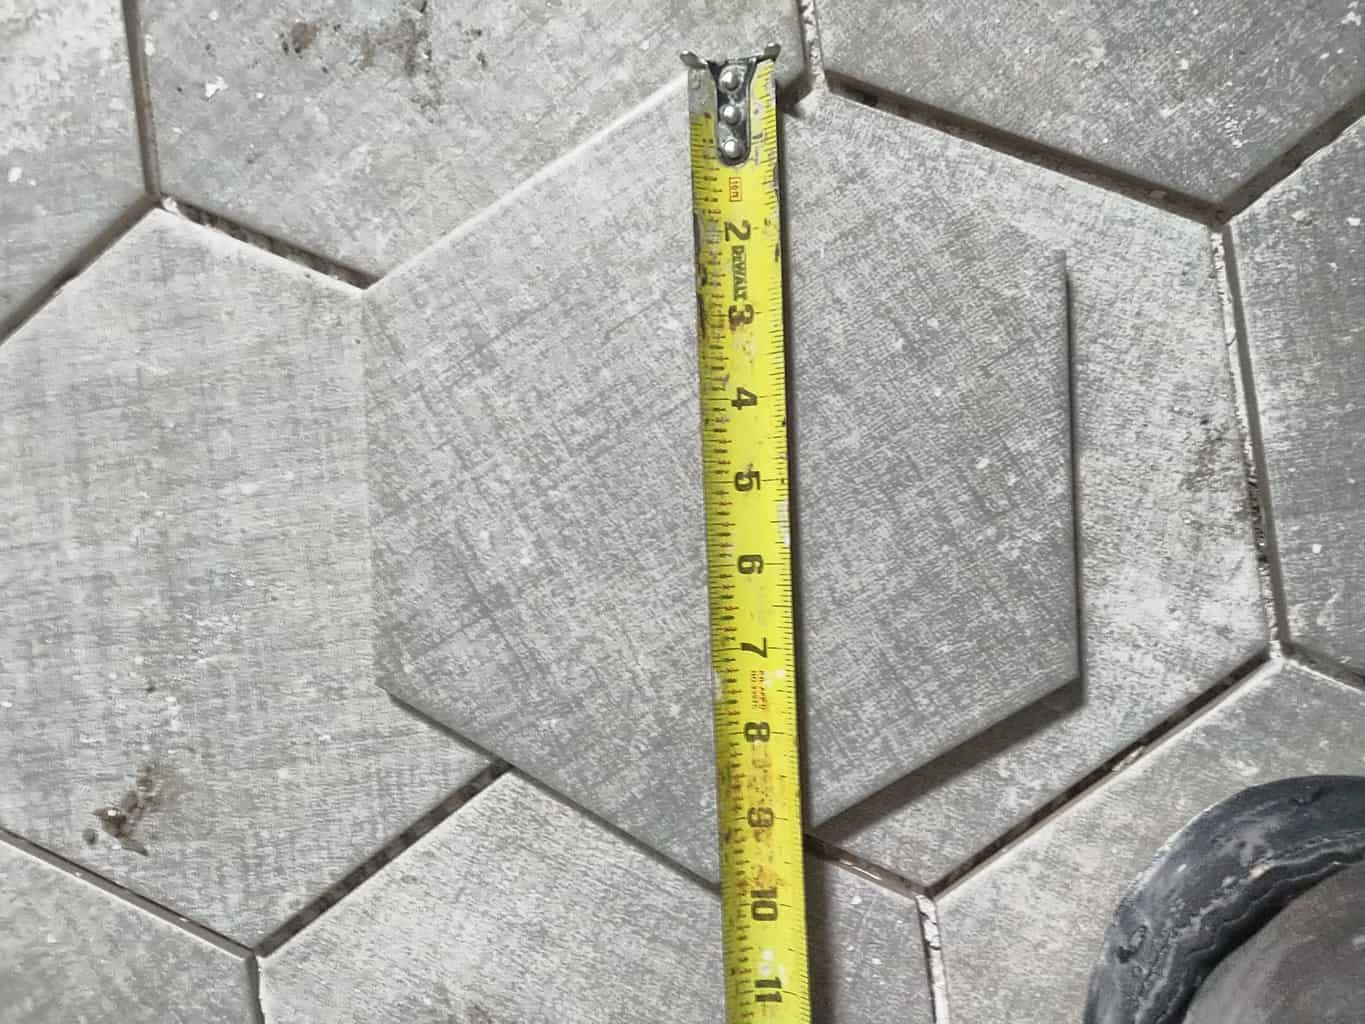 Marking from the point with tape measure